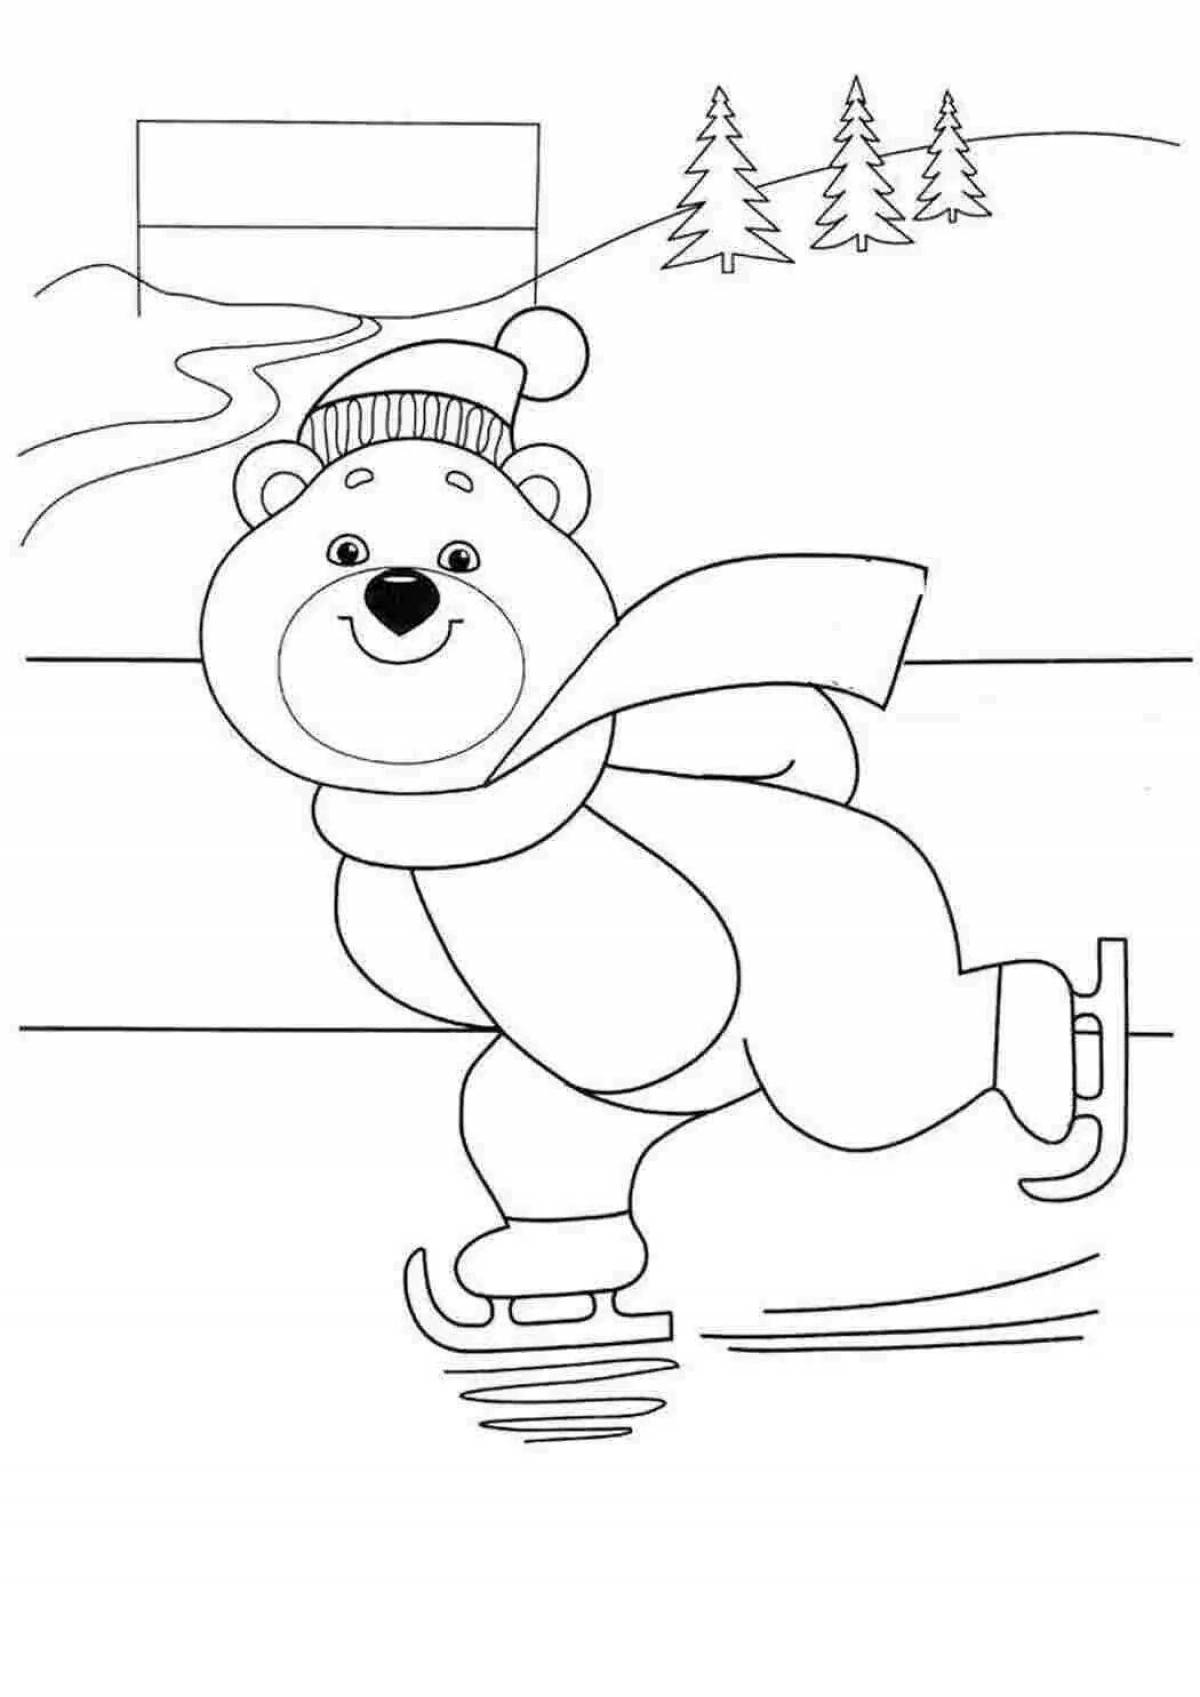 Joyful coloring for children's olympic sports